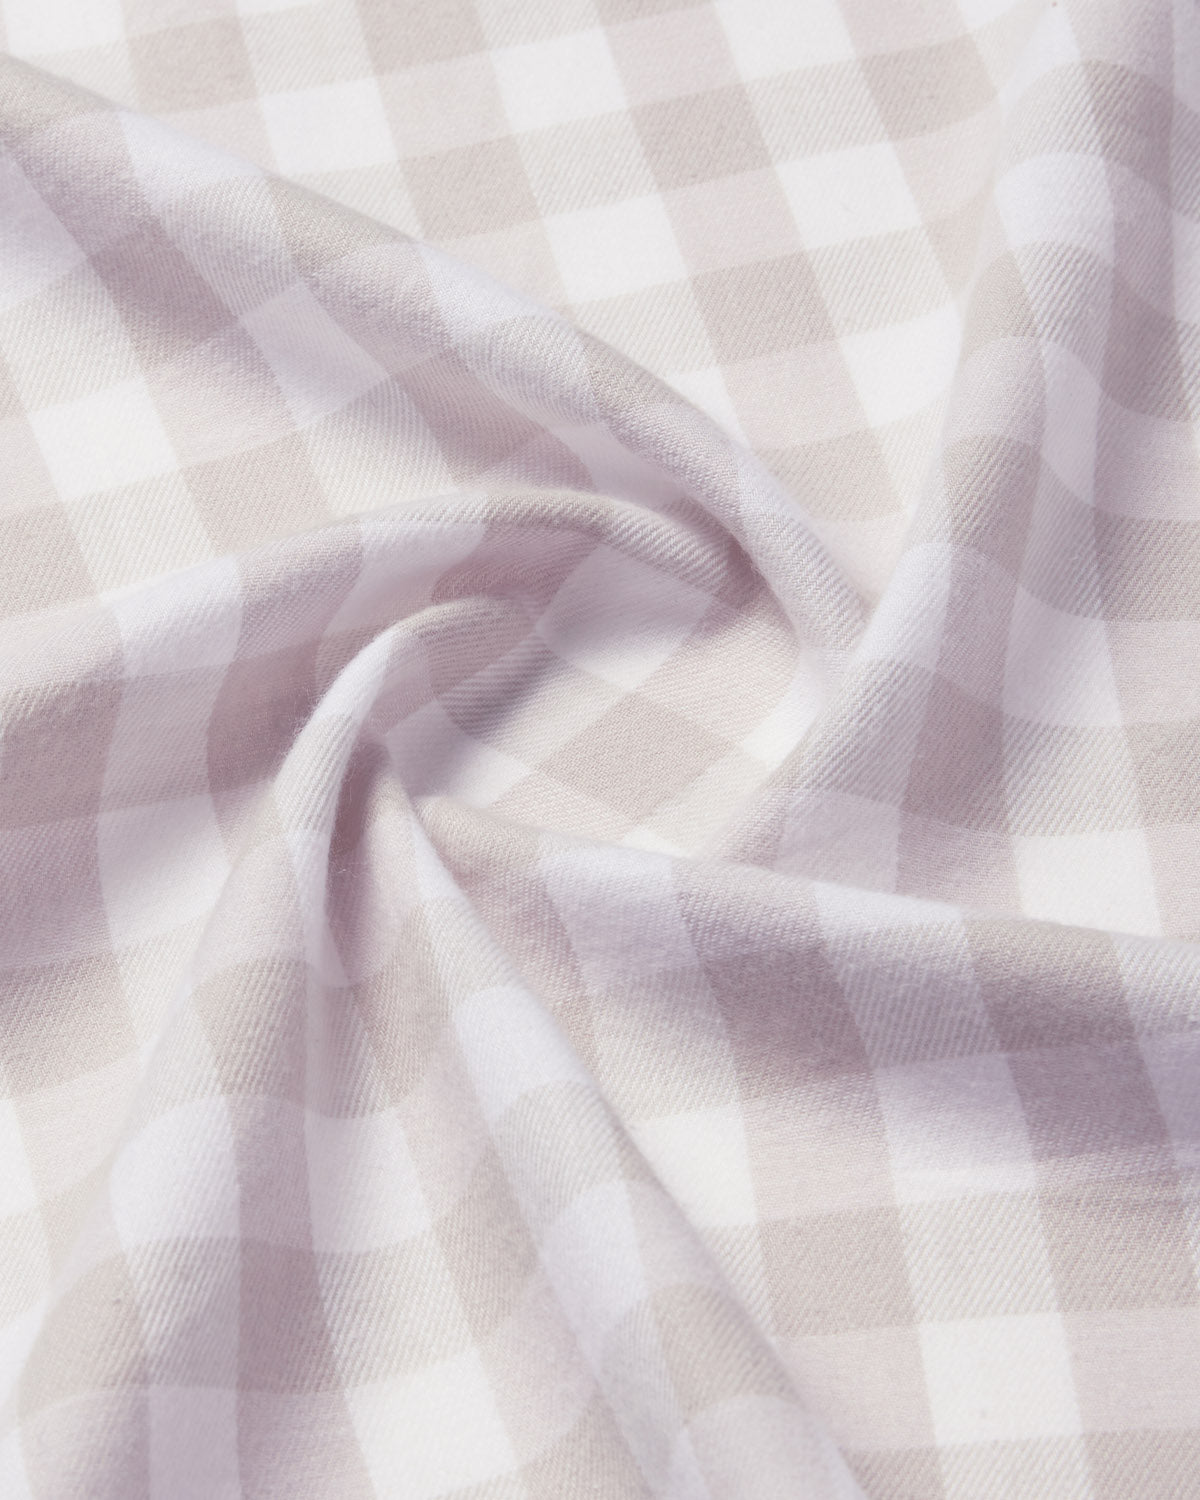 Biscuit Brushed Checked Shirt